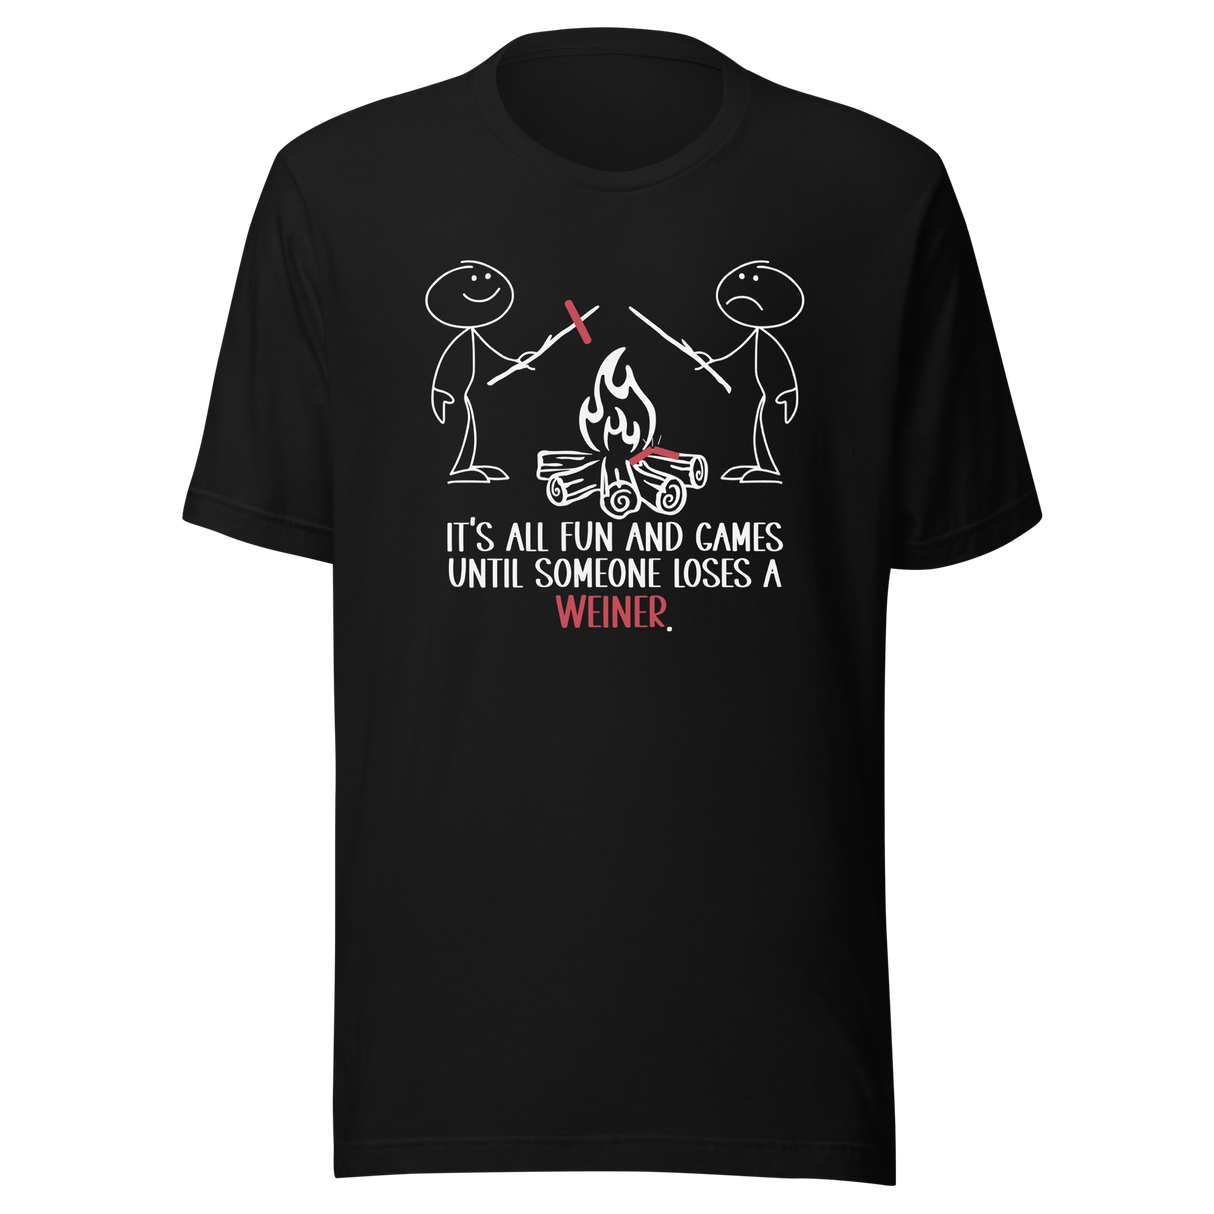 its-all-fun-and-games-until-someone-loses-a-weiner-funny-tee-funny-t-shirt-games-tee-weiner-t-shirt-humor-tee#color_black